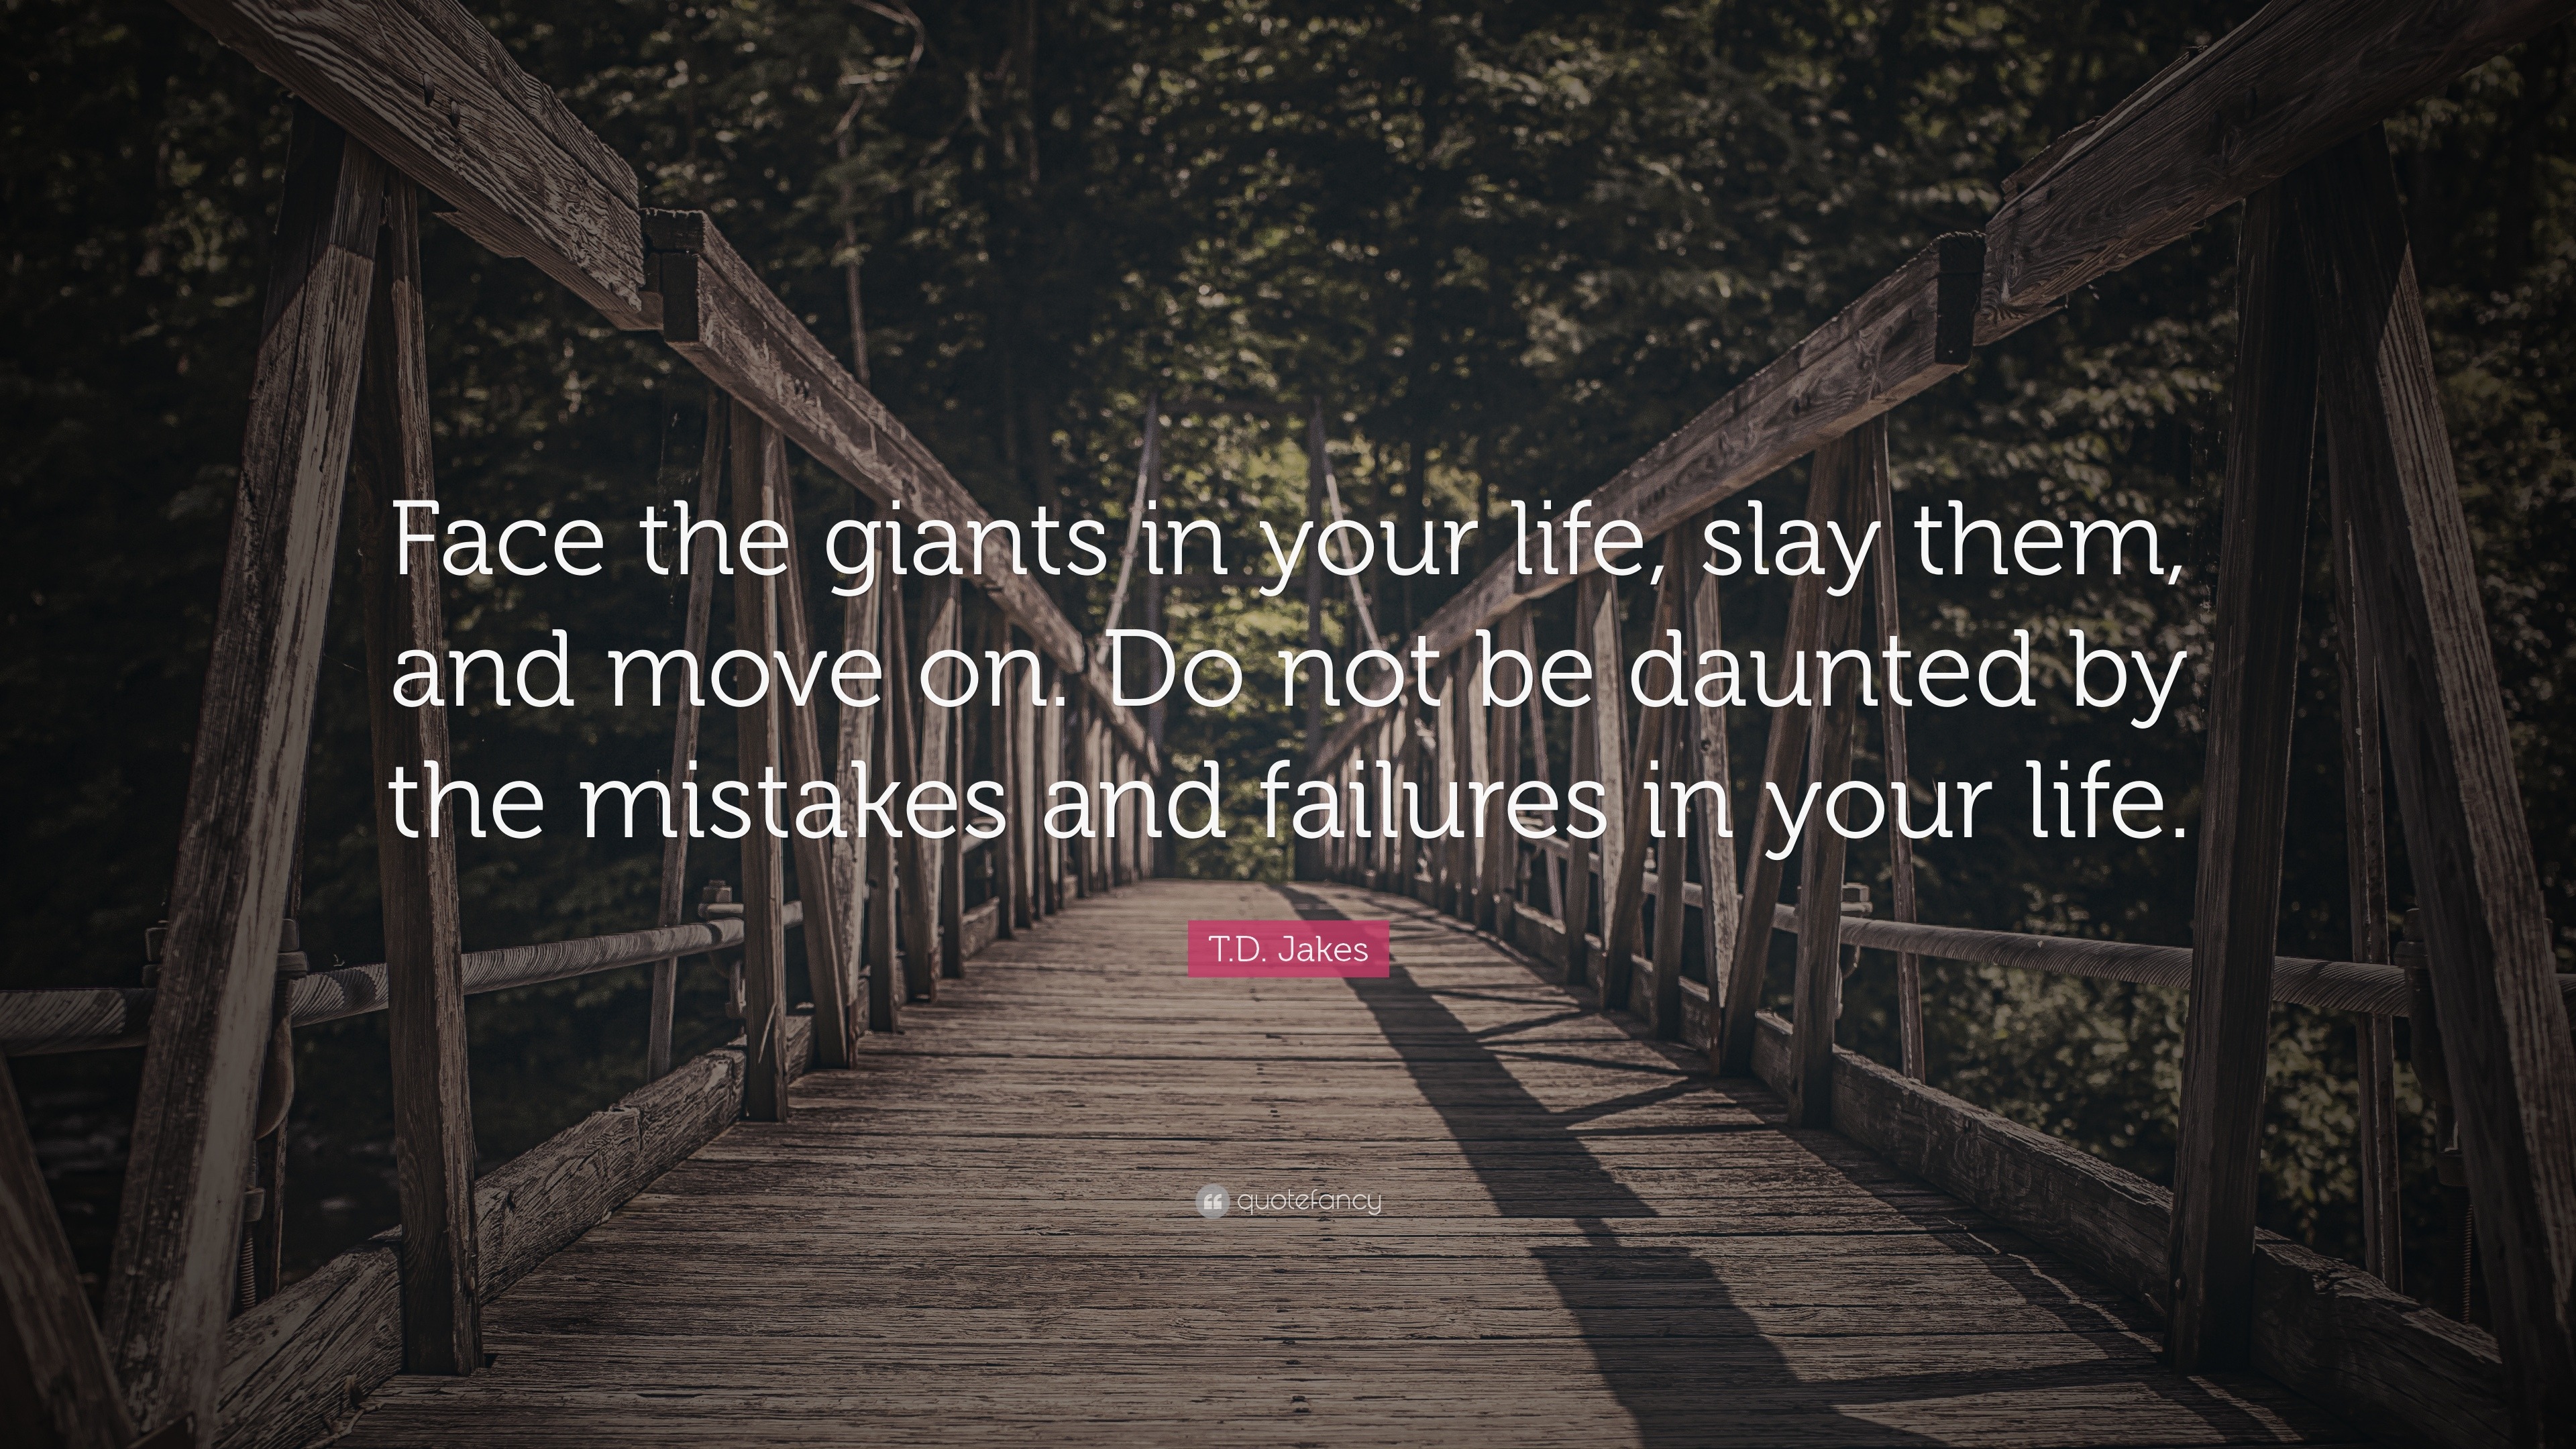 T.D. Jakes Quote: “Face the giants in your life, slay them, and move on ...